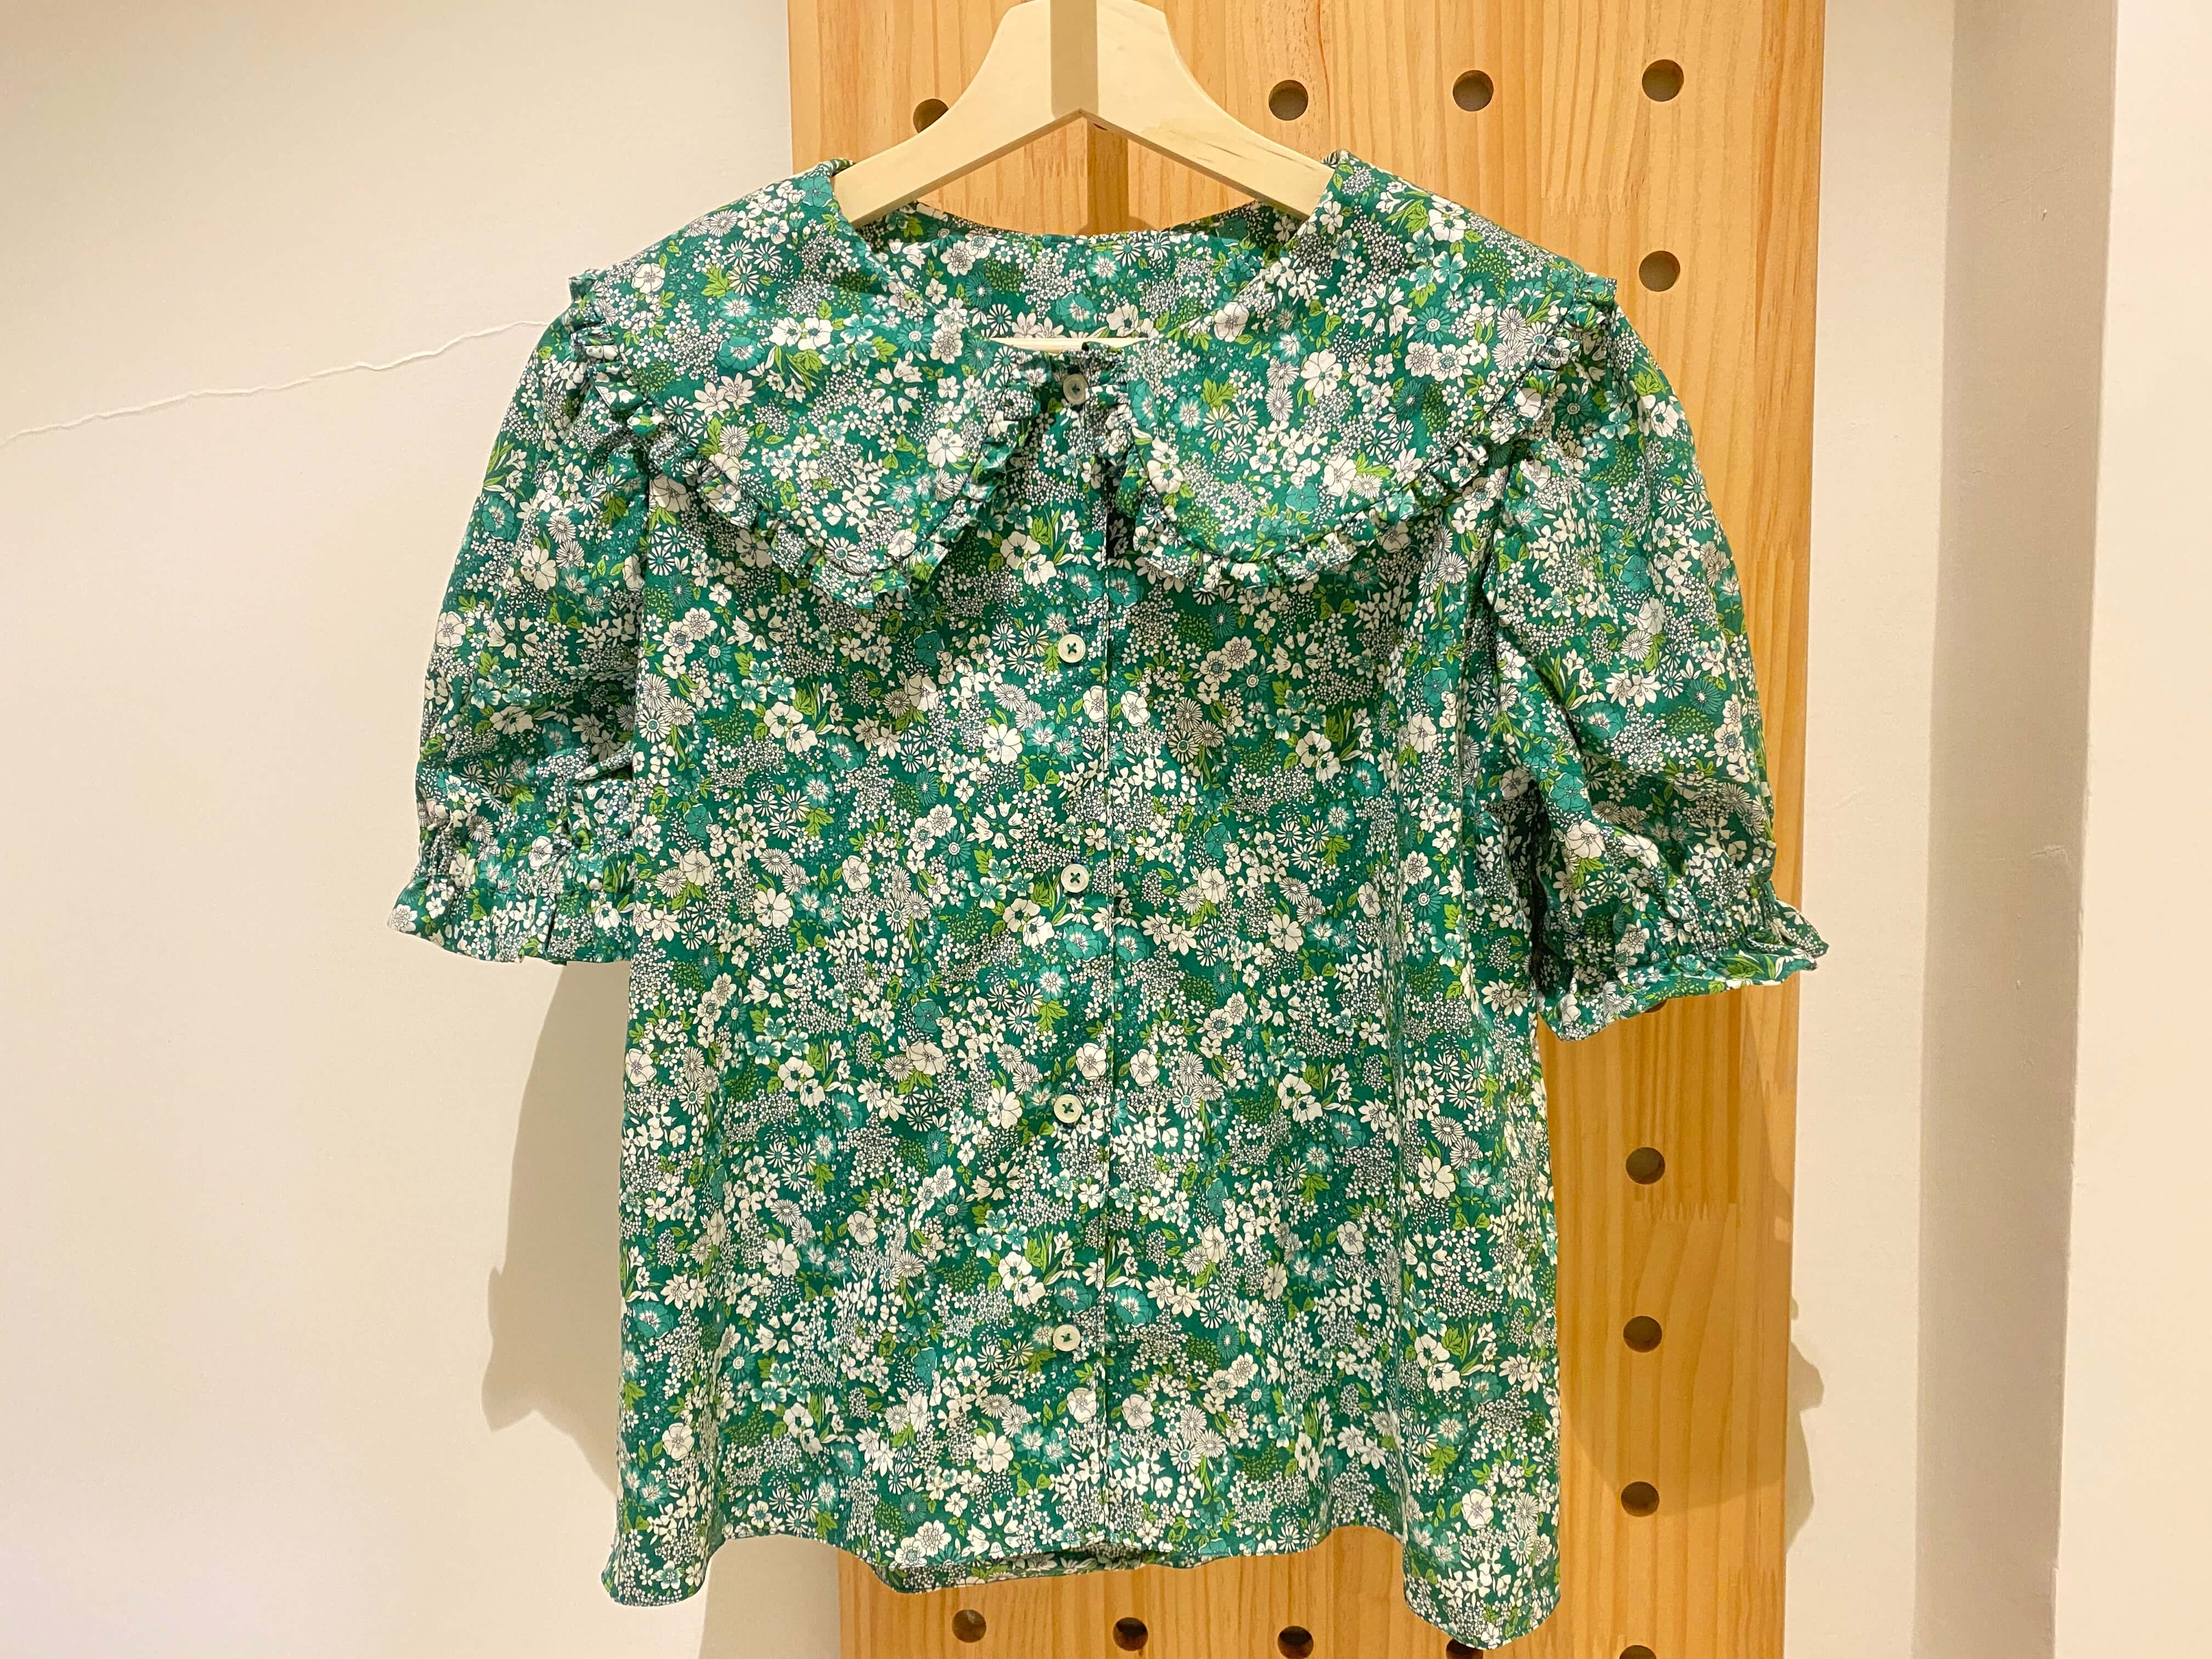 Floral, Short Sleeve Blouse with Peter Pan Collar, for Girls - ecru, Girls